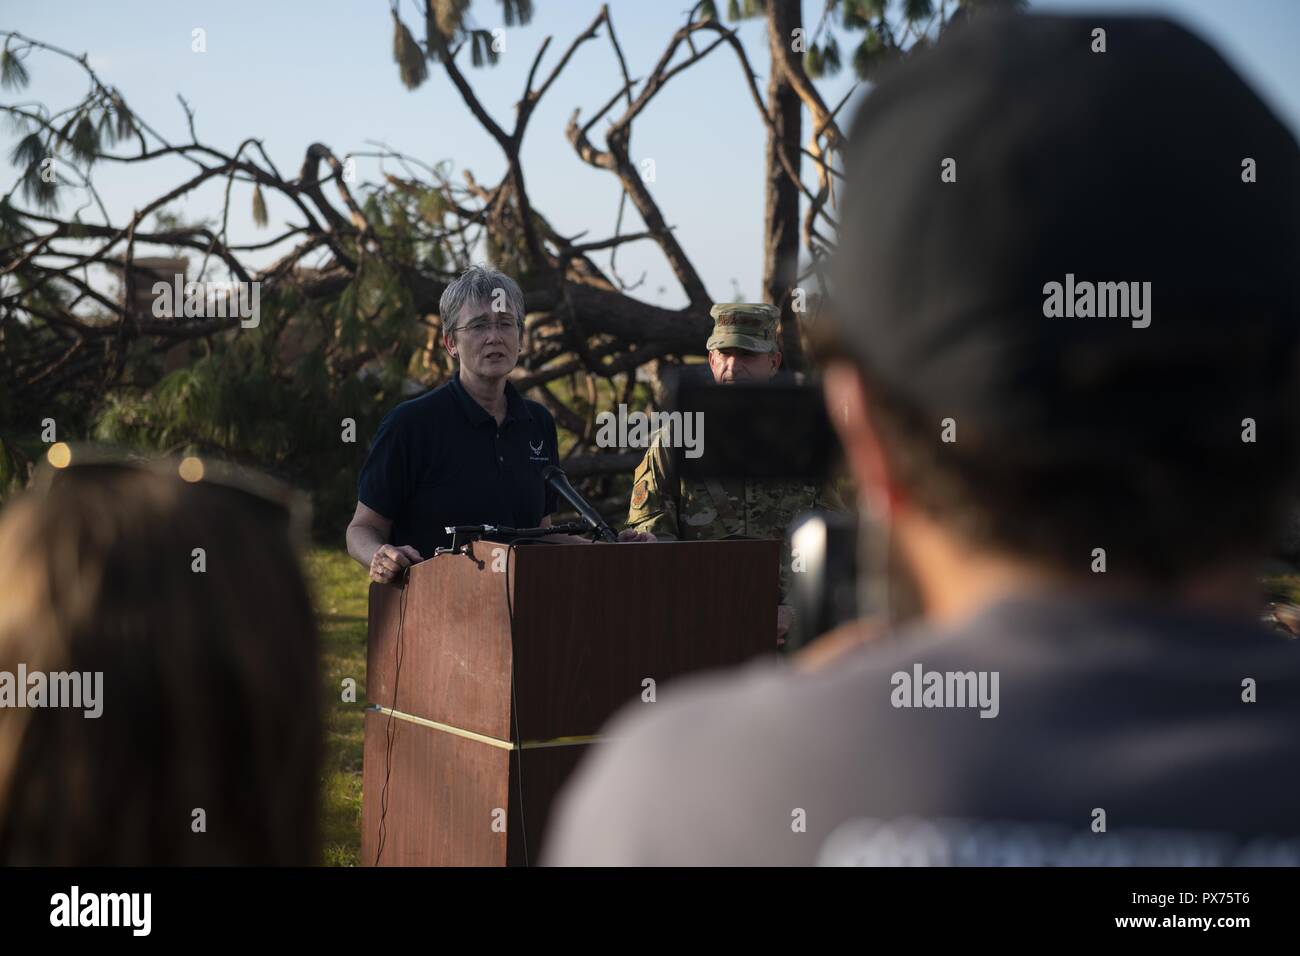 Secretary of the Air Force Heather Wilson speaks with local media during a press conference at Tyndall Air Force Base, Florida, Oct. 14, 2018, October 14, 2018. Air Force senior leaders toured Tyndall Air Force Base to assess the damage from Hurricane Michael, one of the most intense tropical cyclones to ever hit the U.S. (U.S. Air Force photo by Senior Airman Joseph Pick). () Stock Photo